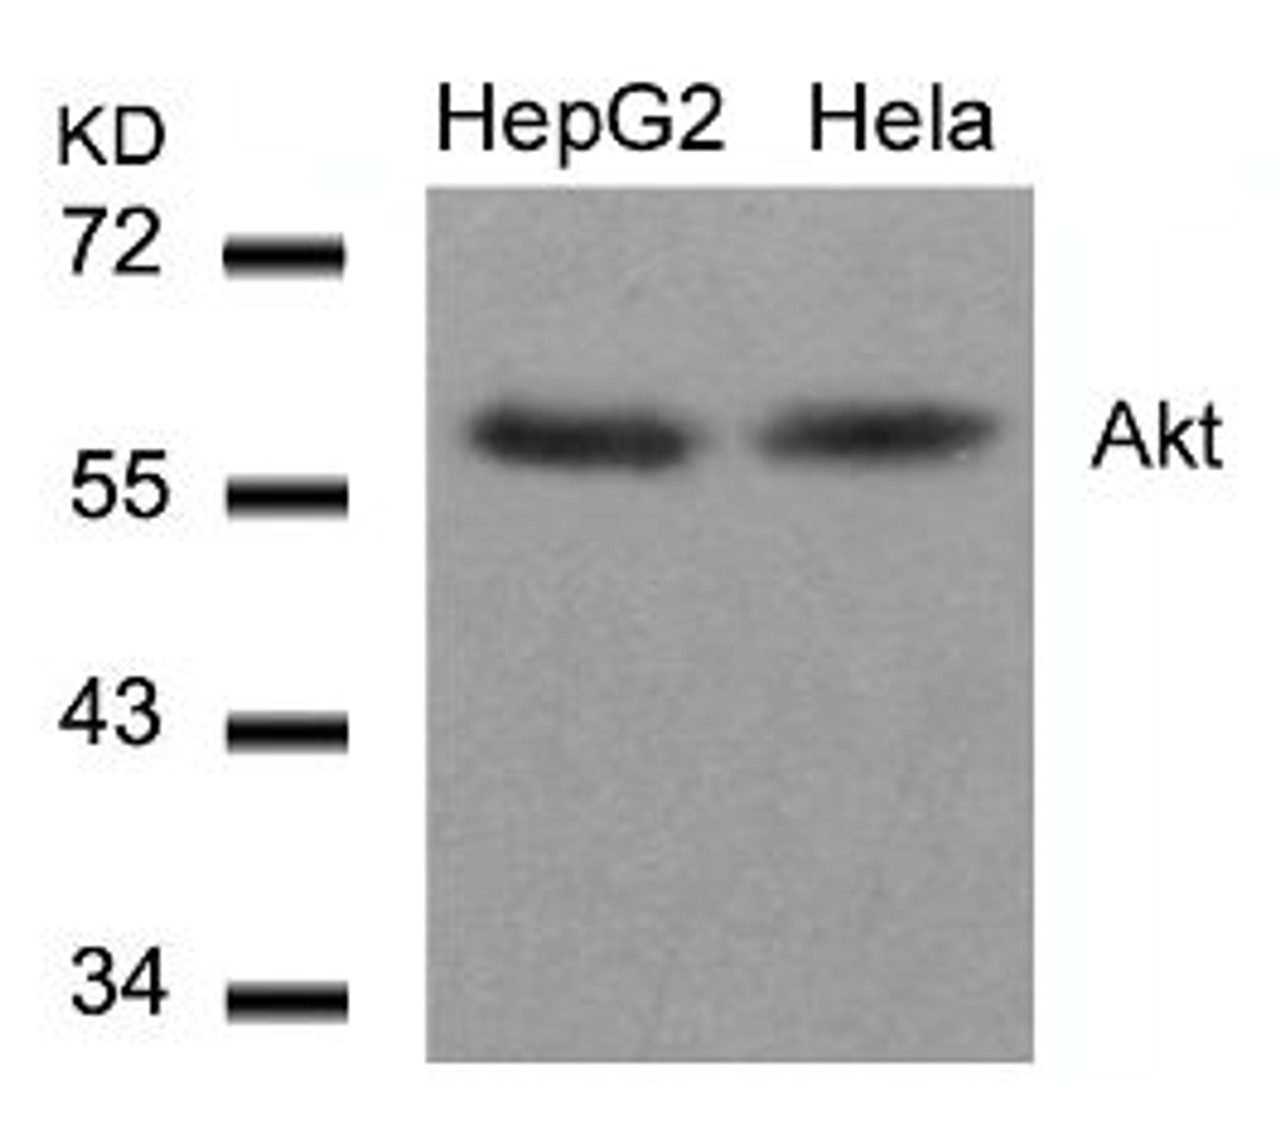 Western blot analysis of lysed extracts from HepG2 and HeLa cells using Akt (Ab-308) .